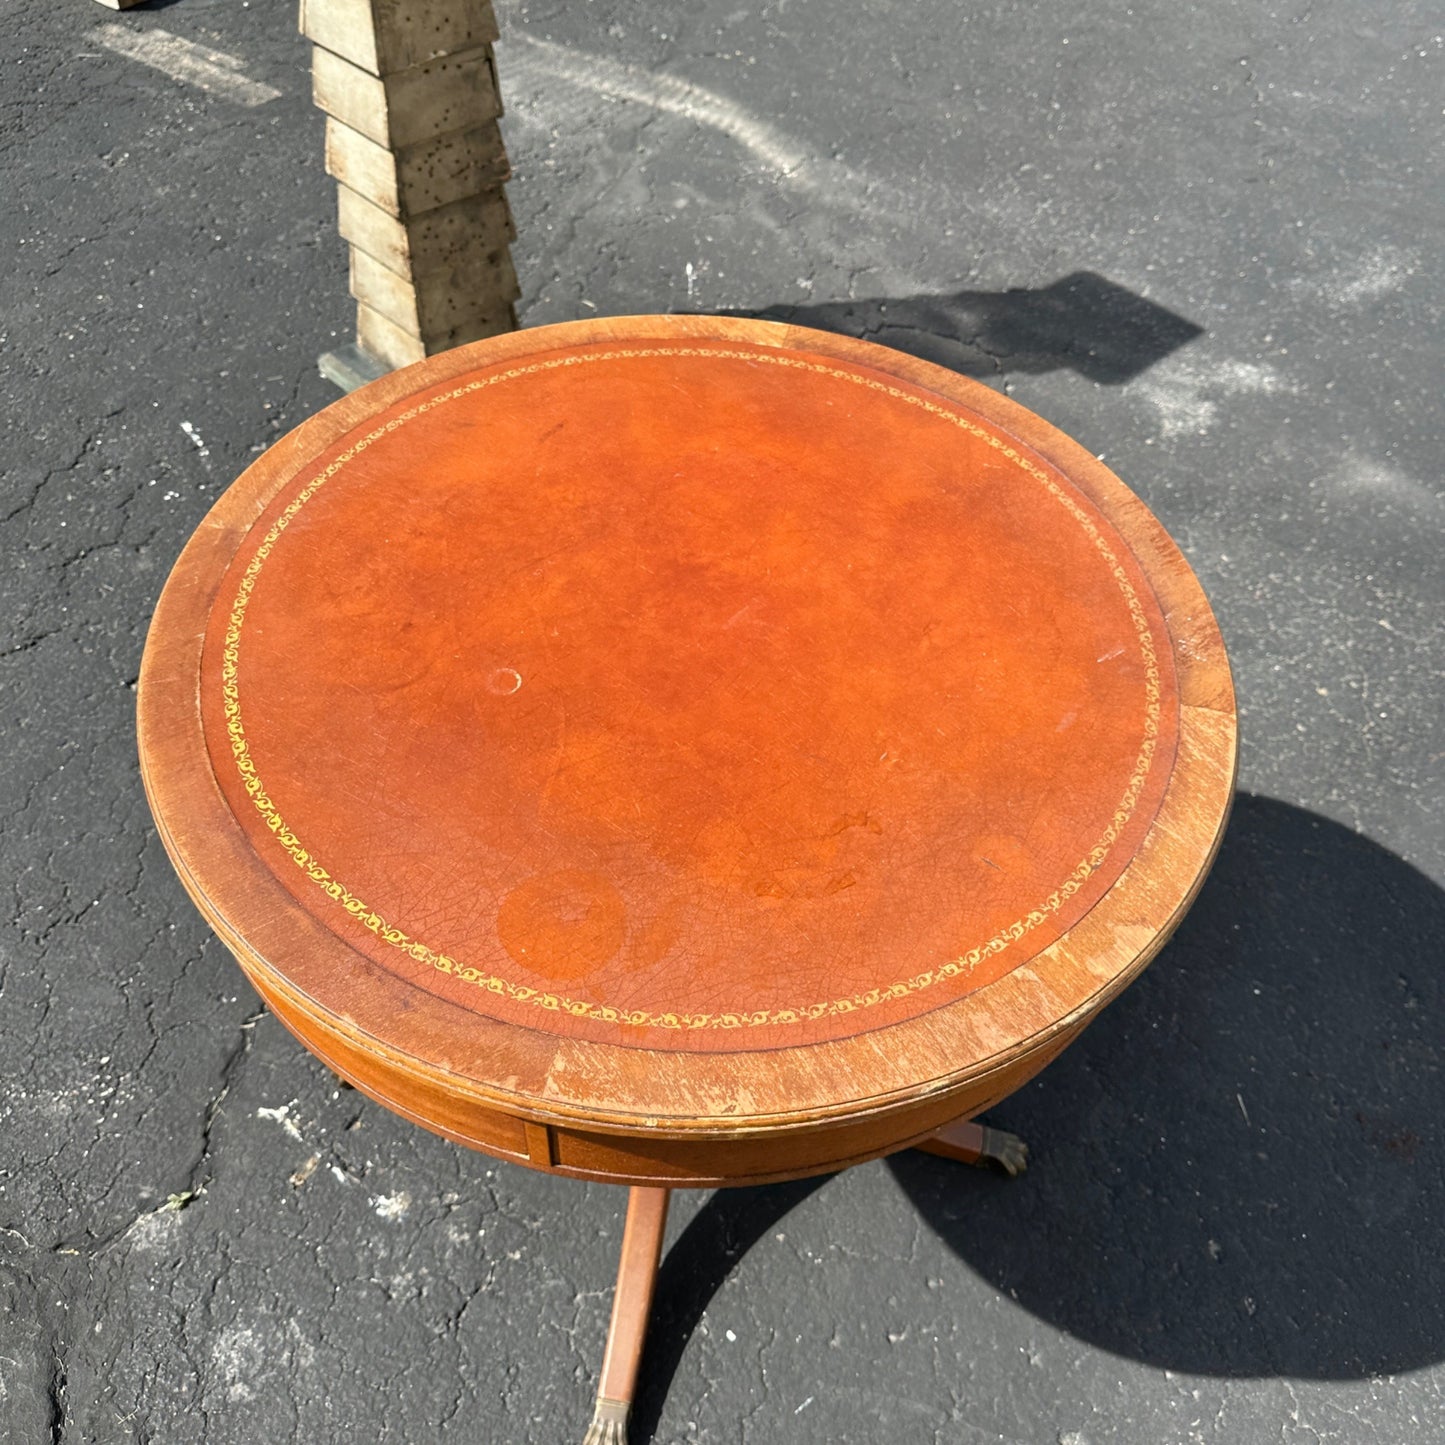 Antique Vintage Round Drum Table Side End Table w/ Drawers